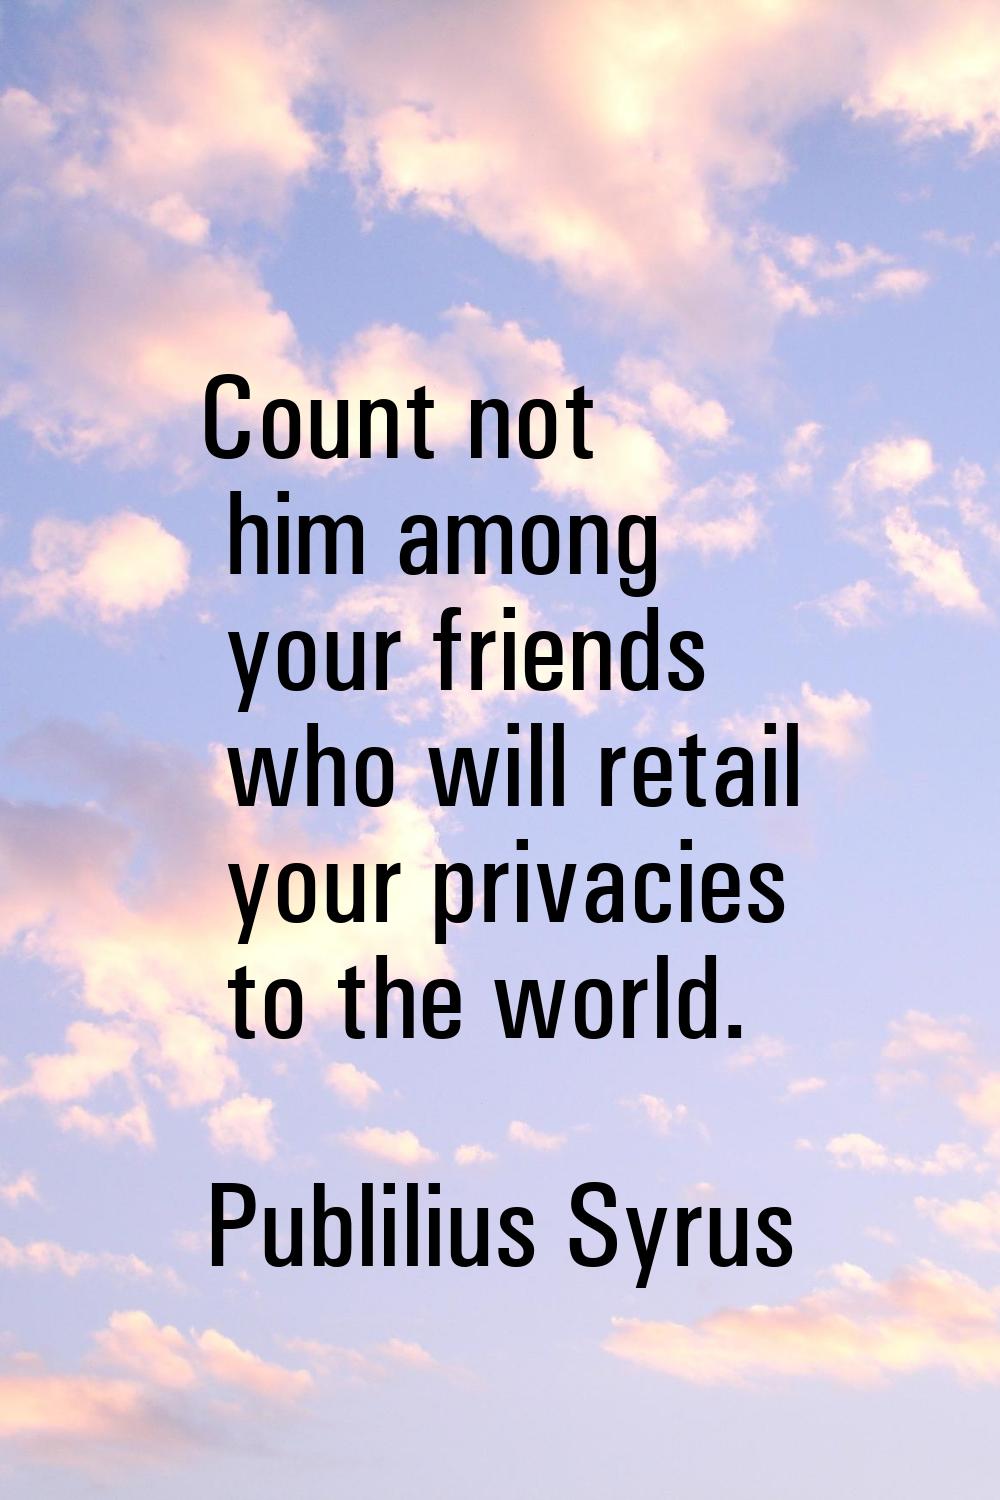 Count not him among your friends who will retail your privacies to the world.